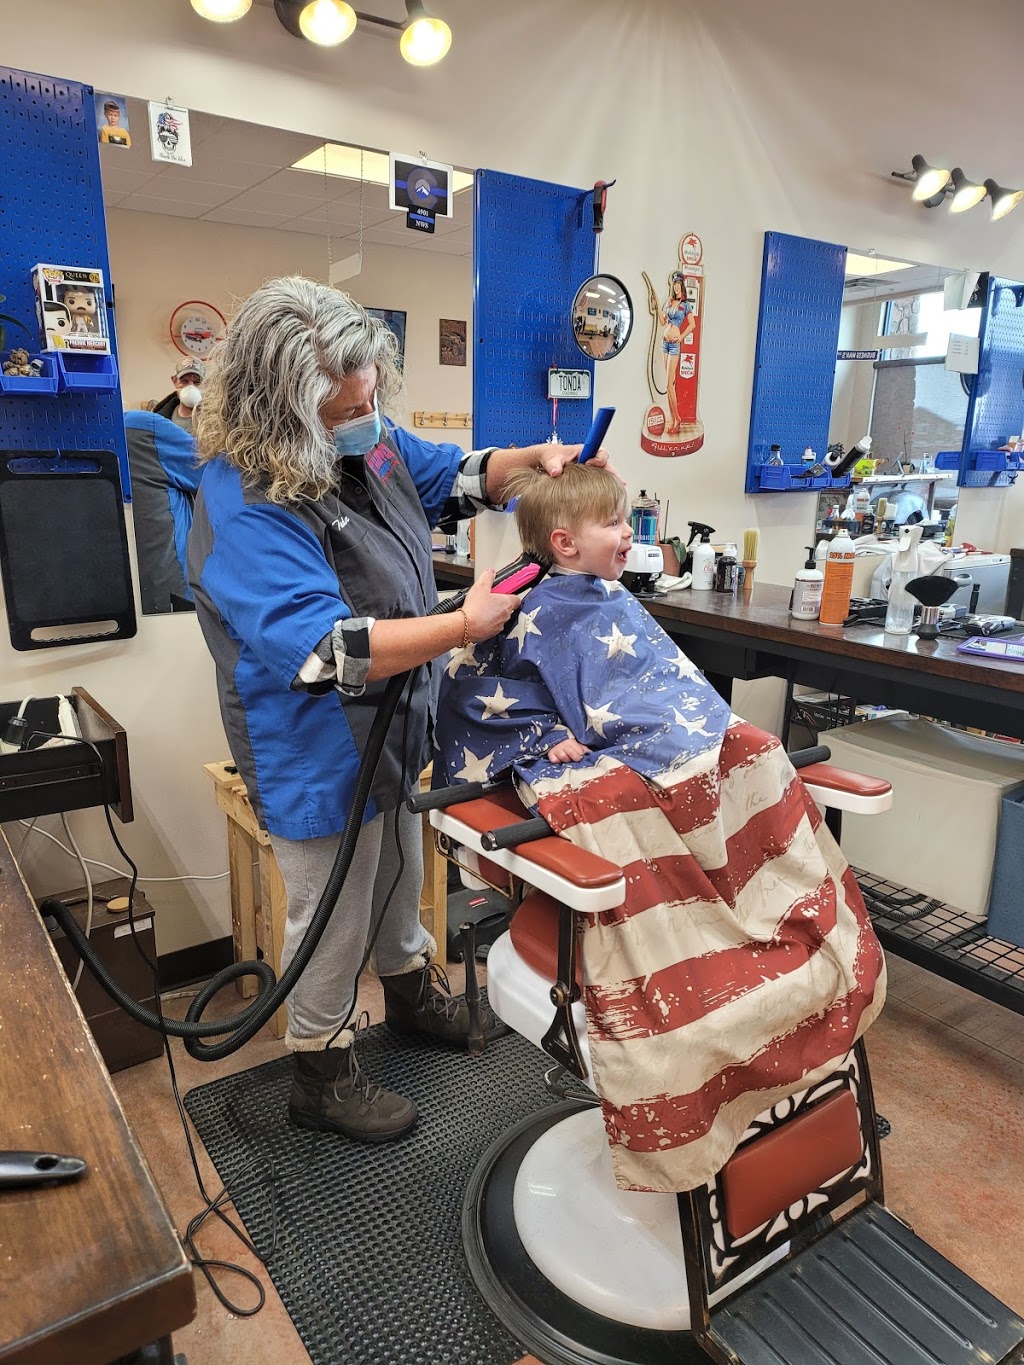 Get Clipped Barbershop | 11856 Stapleton Dr, Falcon, CO 80831 | Phone: (719) 510-4463